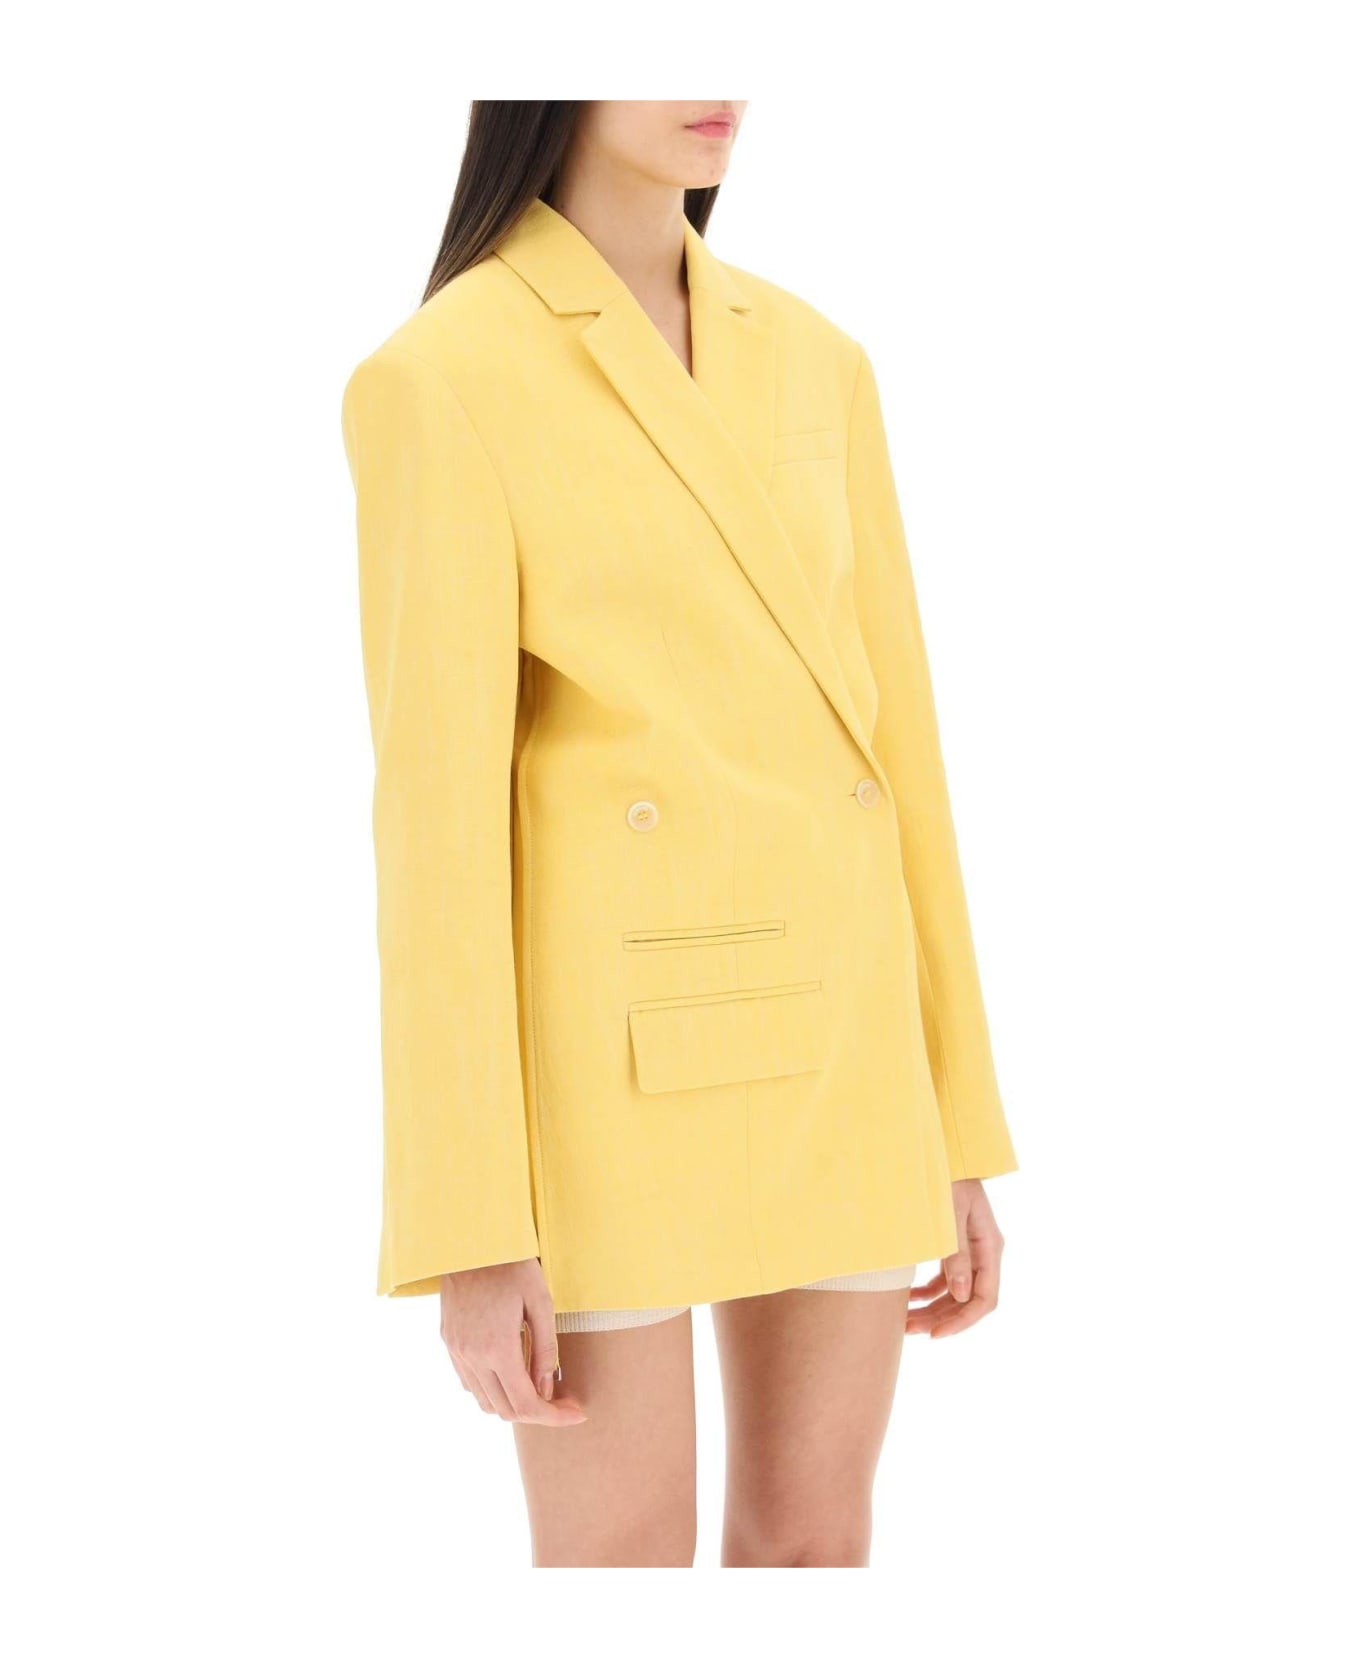 Jacquemus Double-breasted Blazer - Yellow ブレザー